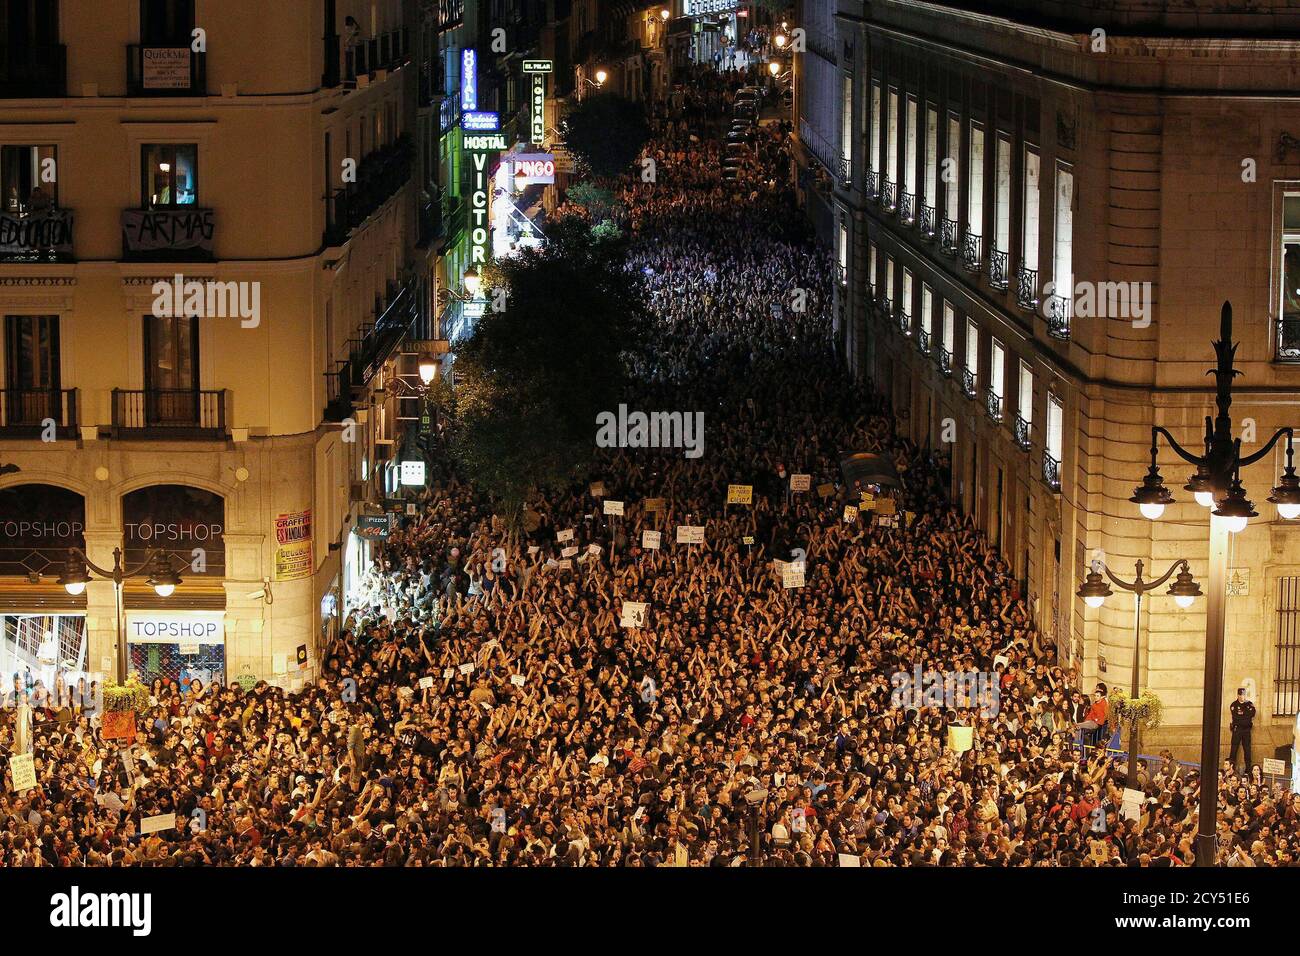 Demonstrators raise their arms just after midnight as they fill up Madrid's  Puerta del Sol, spilling into sidestreets early May 21, 2011. Tens of  thousands of Spaniards angry over joblessness protested for